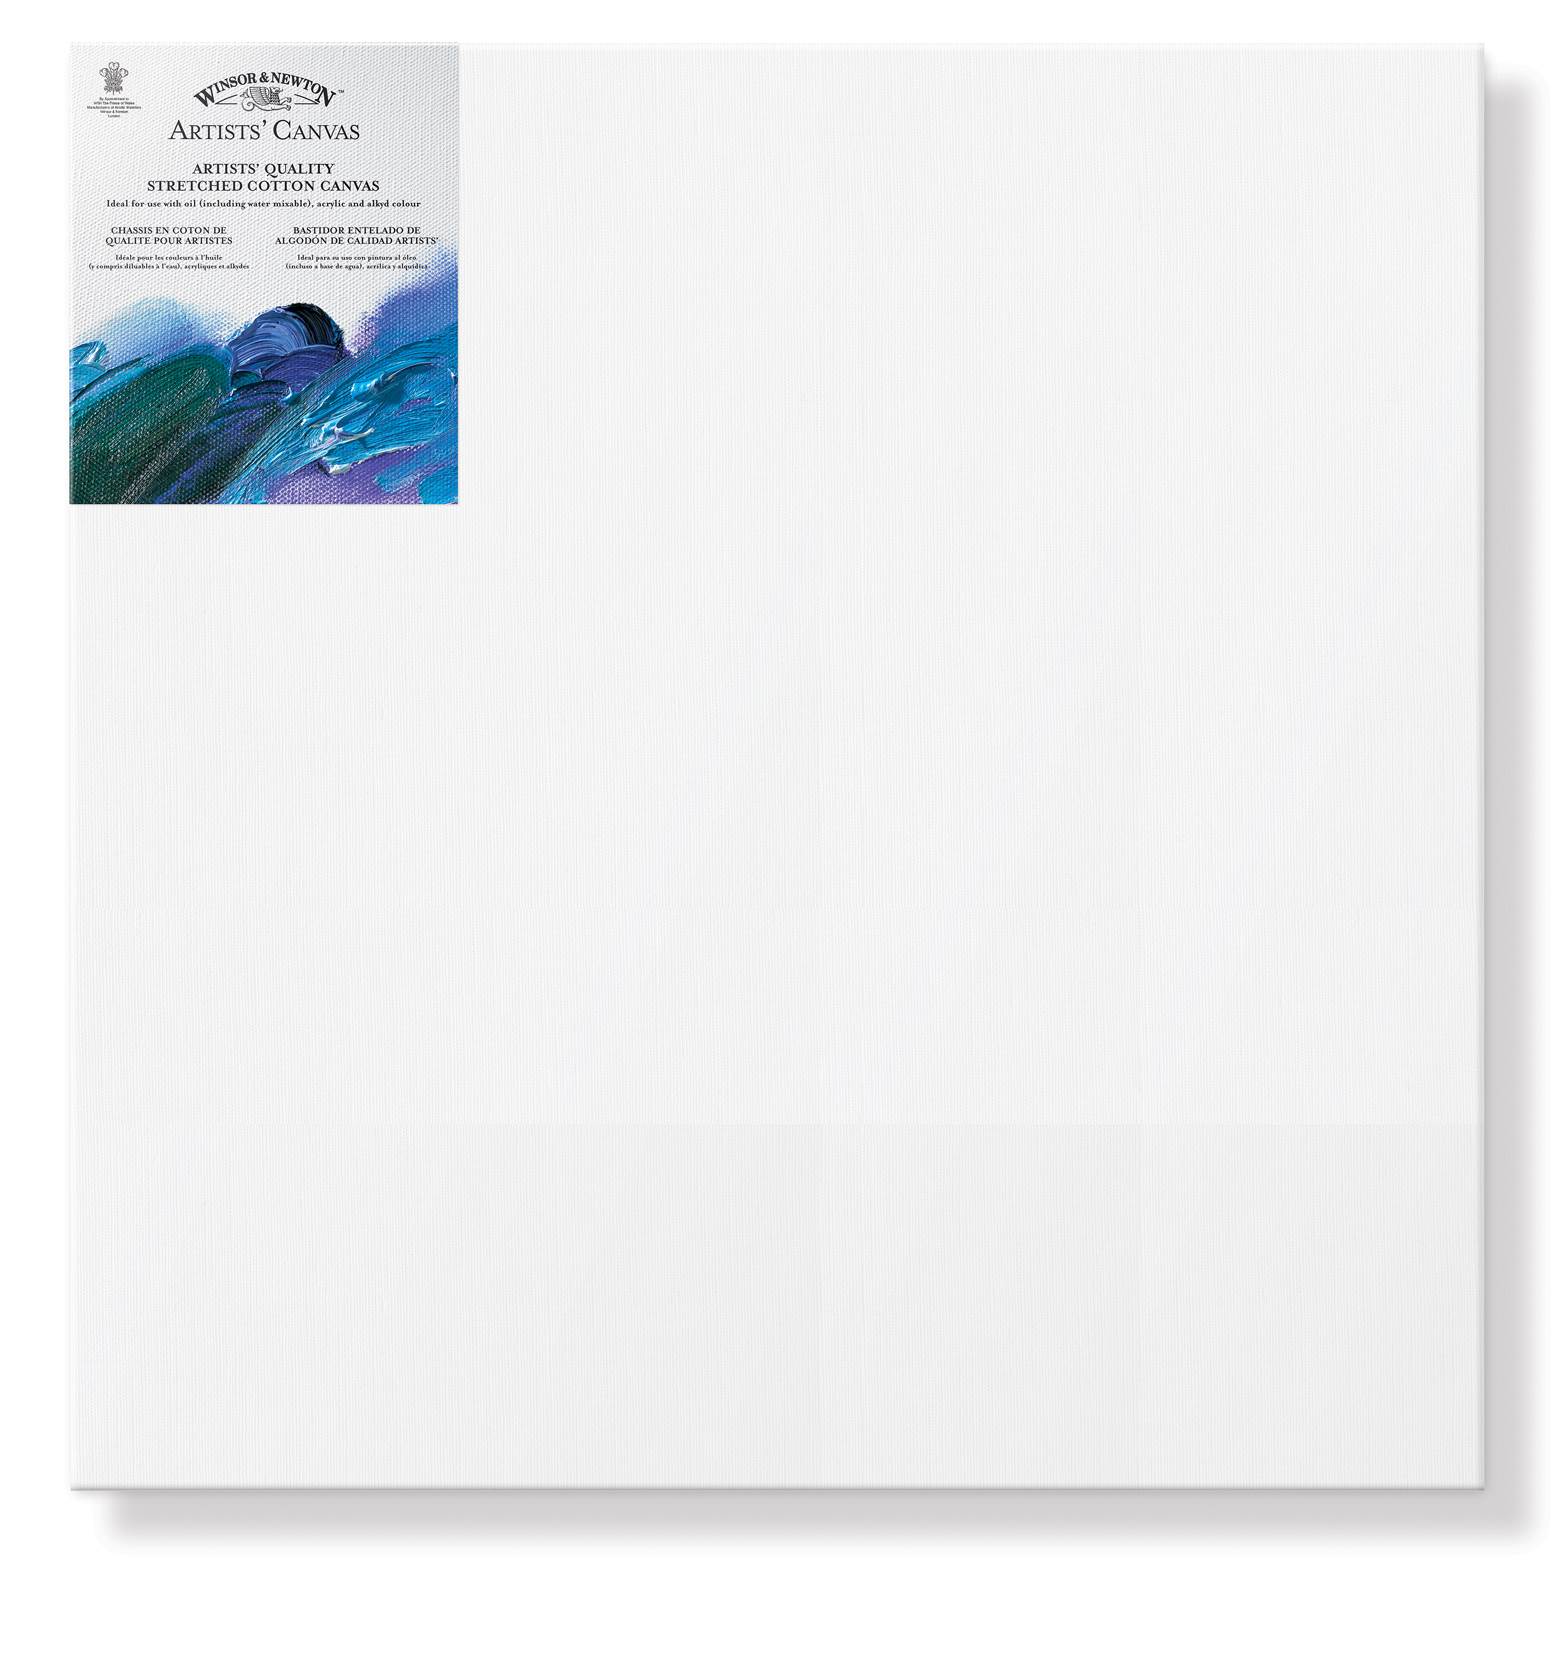 Winsor & Newton Artists' Quality Stretched Cotton Canvas-14x14in